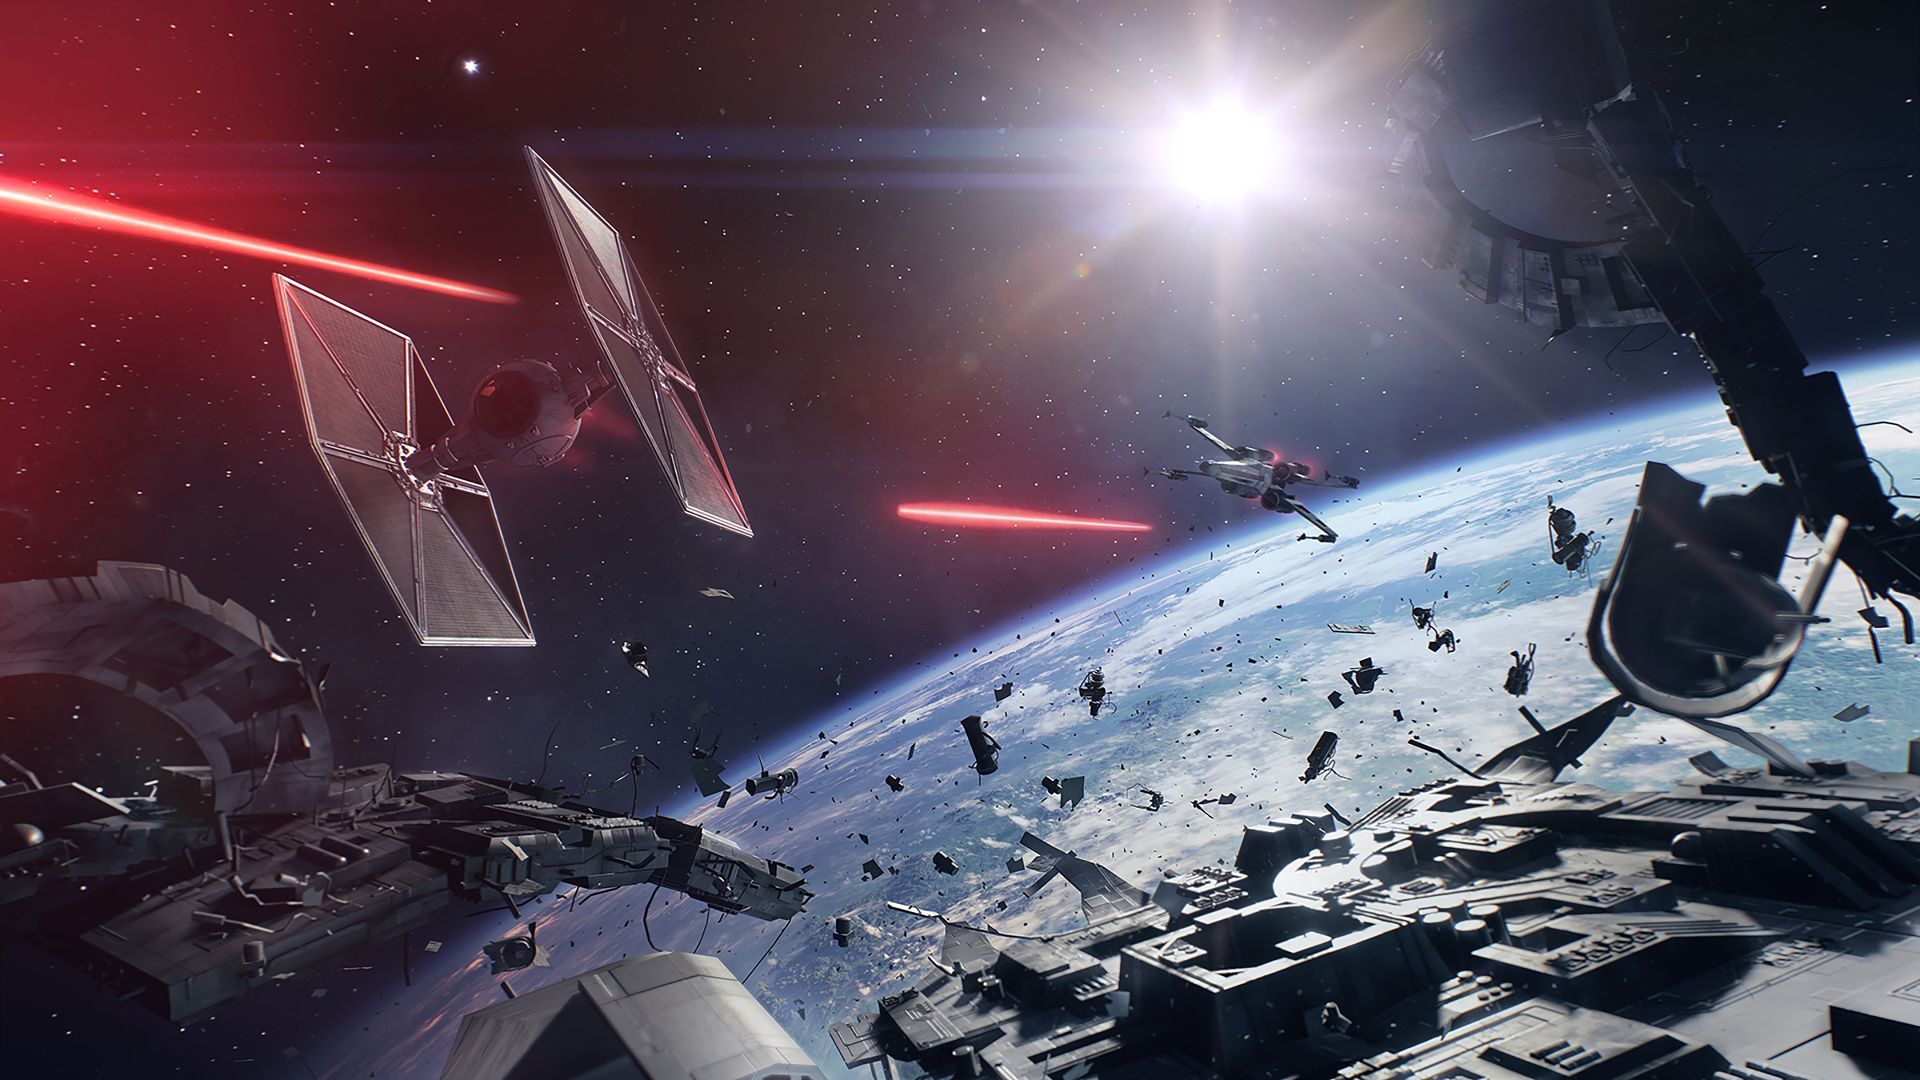 Star Wars Battlefront II Servers to Be Updated Today, Fixes Performance